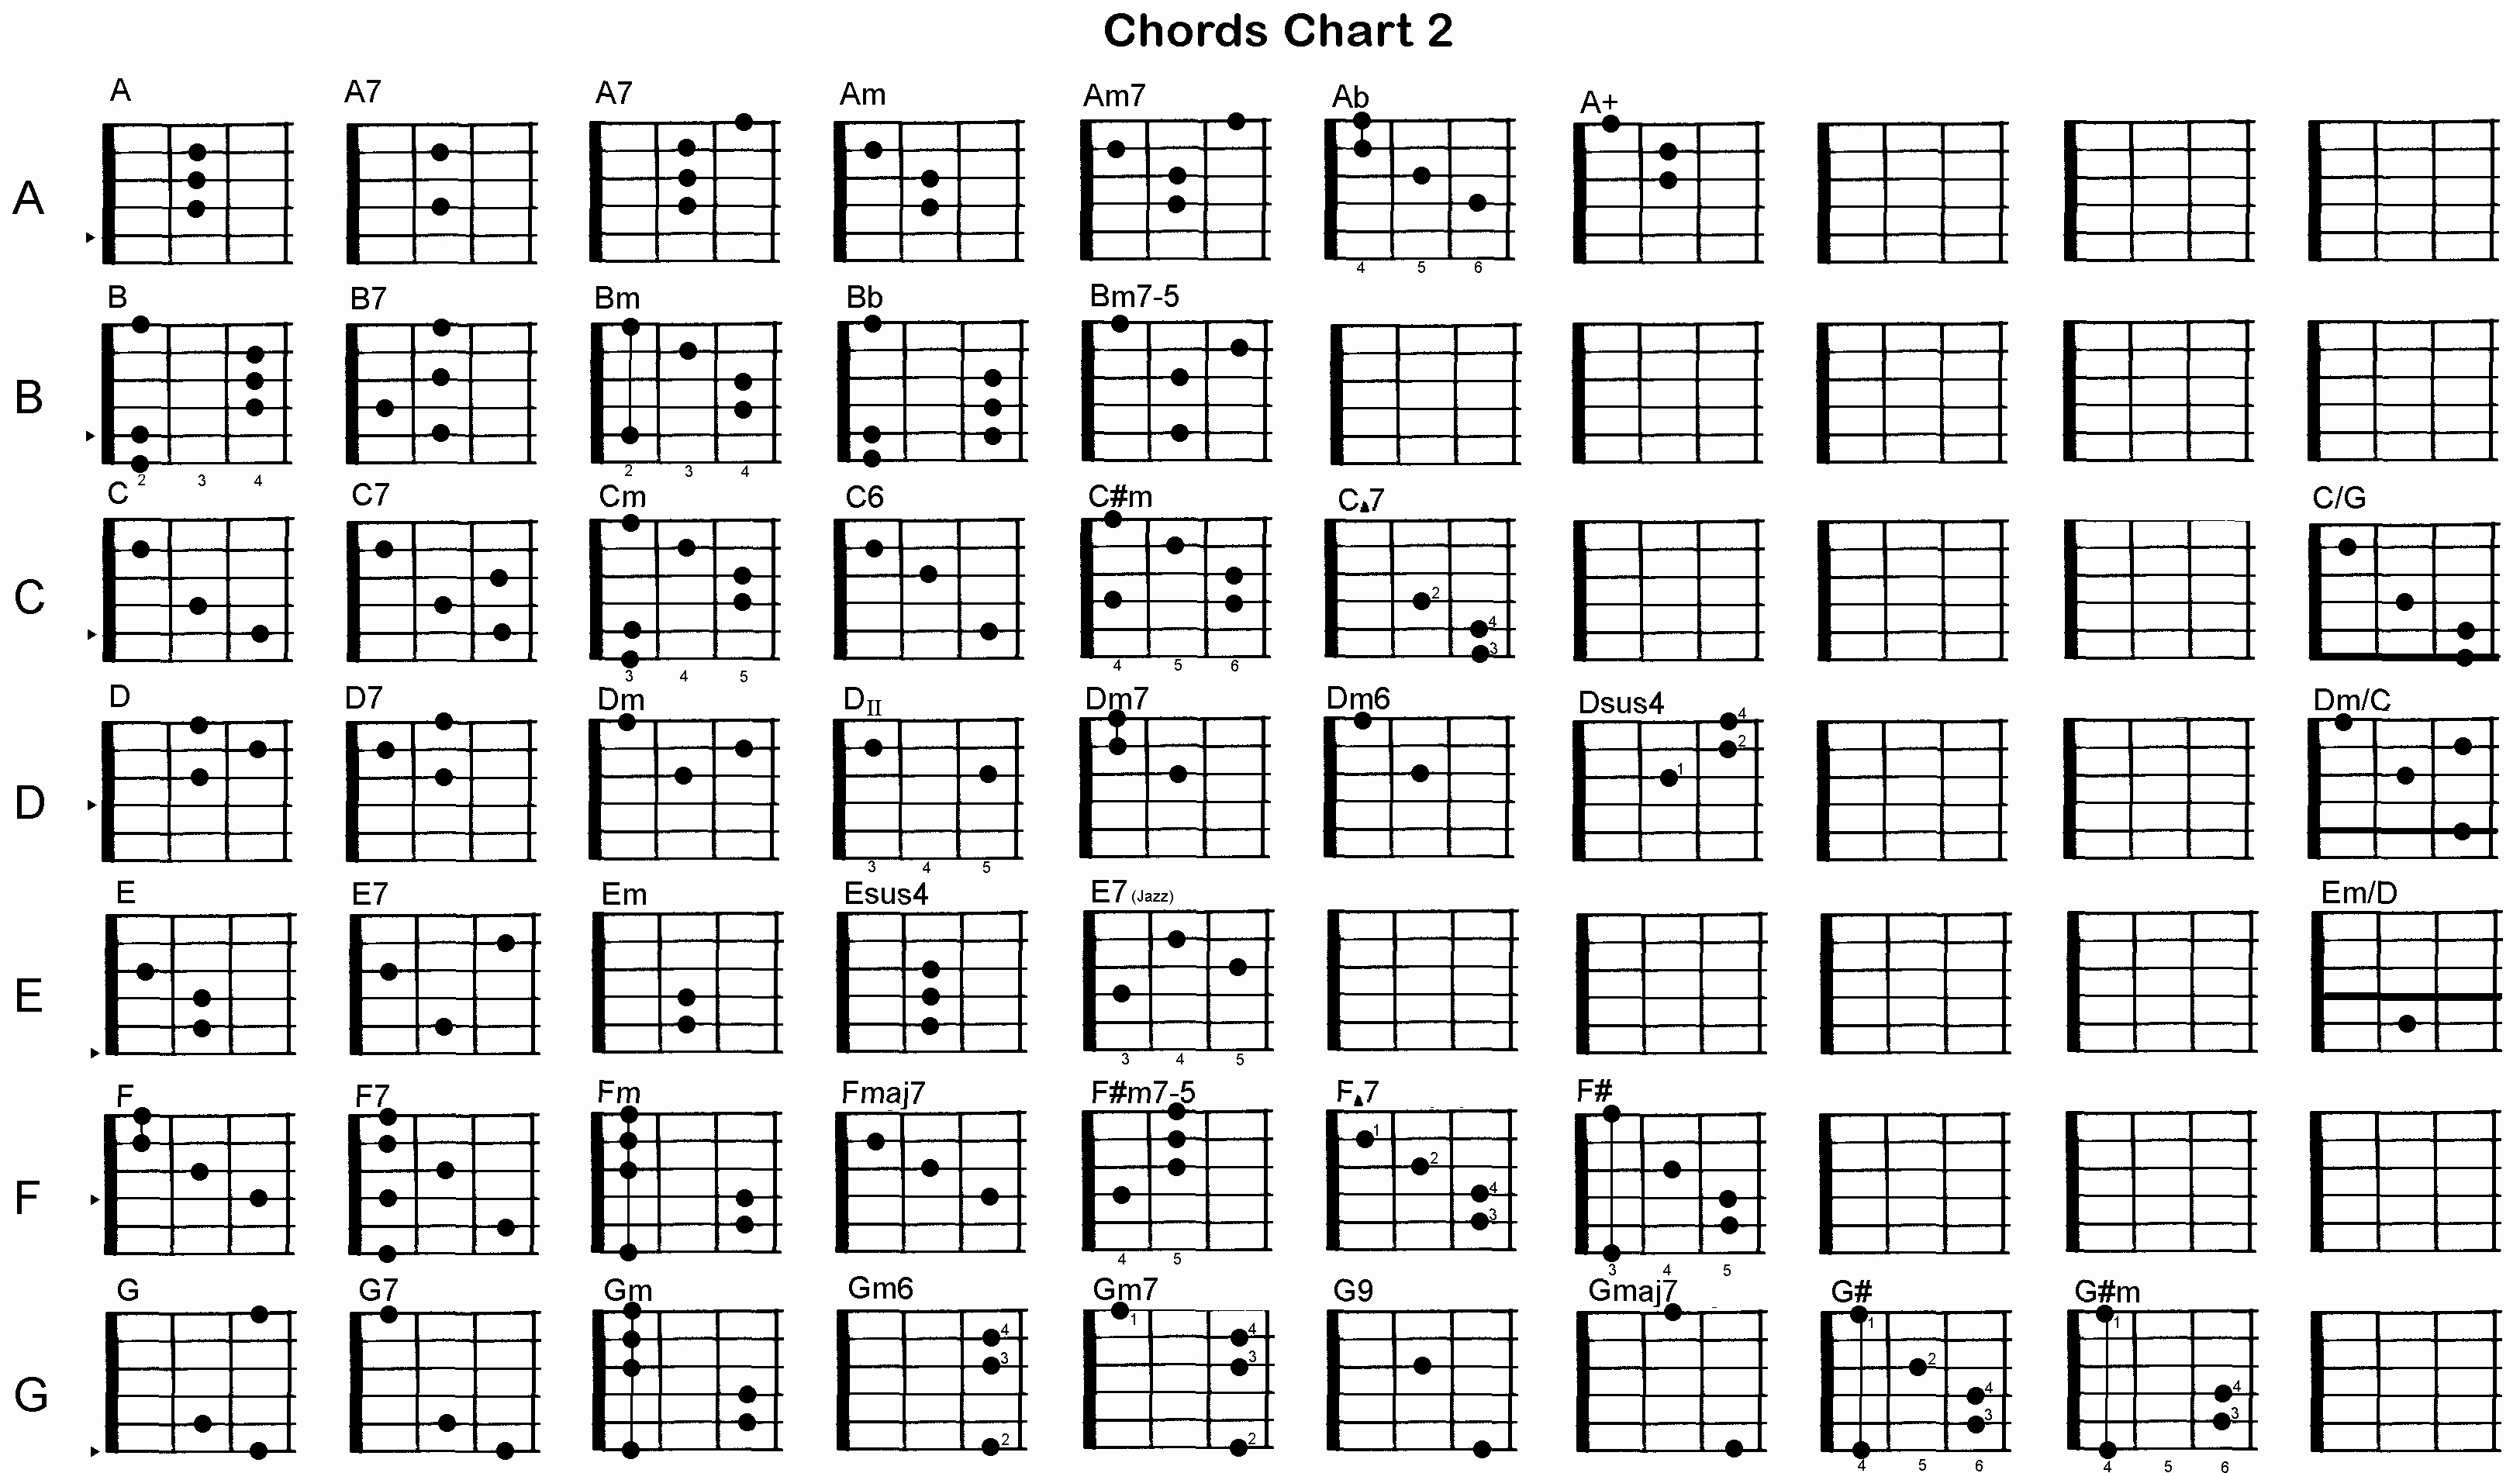 Complete Guitar Chords Charts Lovely Plete Chord Chart Helpful Music Things